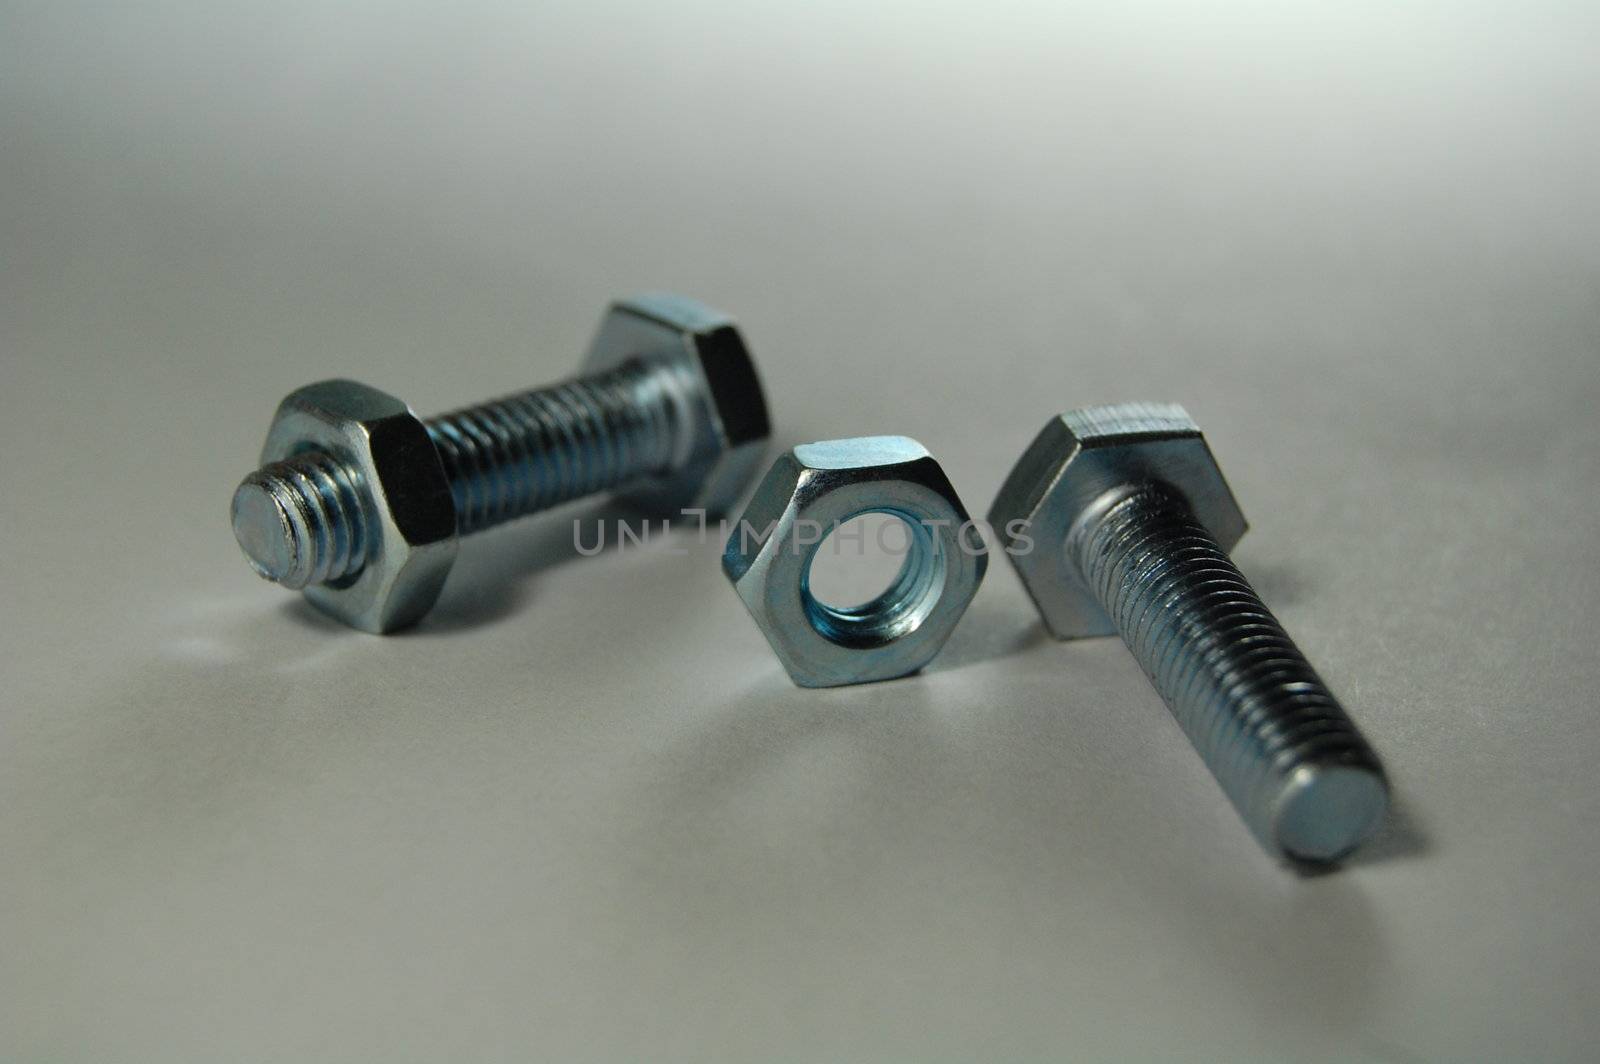 A set of shiny metal nuts and bolts for do-it-yourself  stuff or repairing/replacing old parts